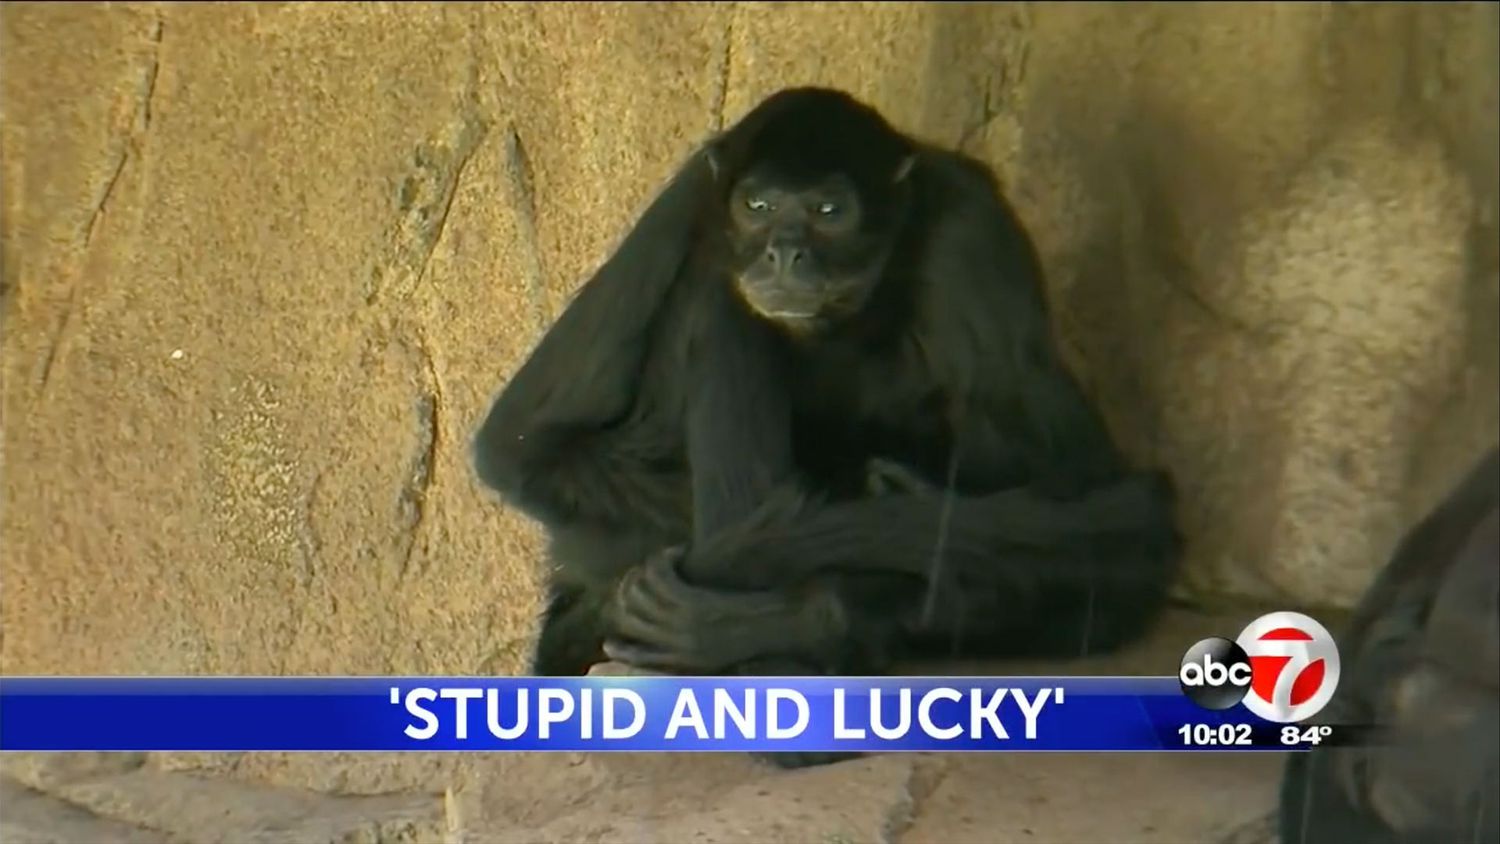 Texas Woman Facing Charges After Jumping Into Monkey Habitat at El Paso Zoo: 'Stupid and Lucky'